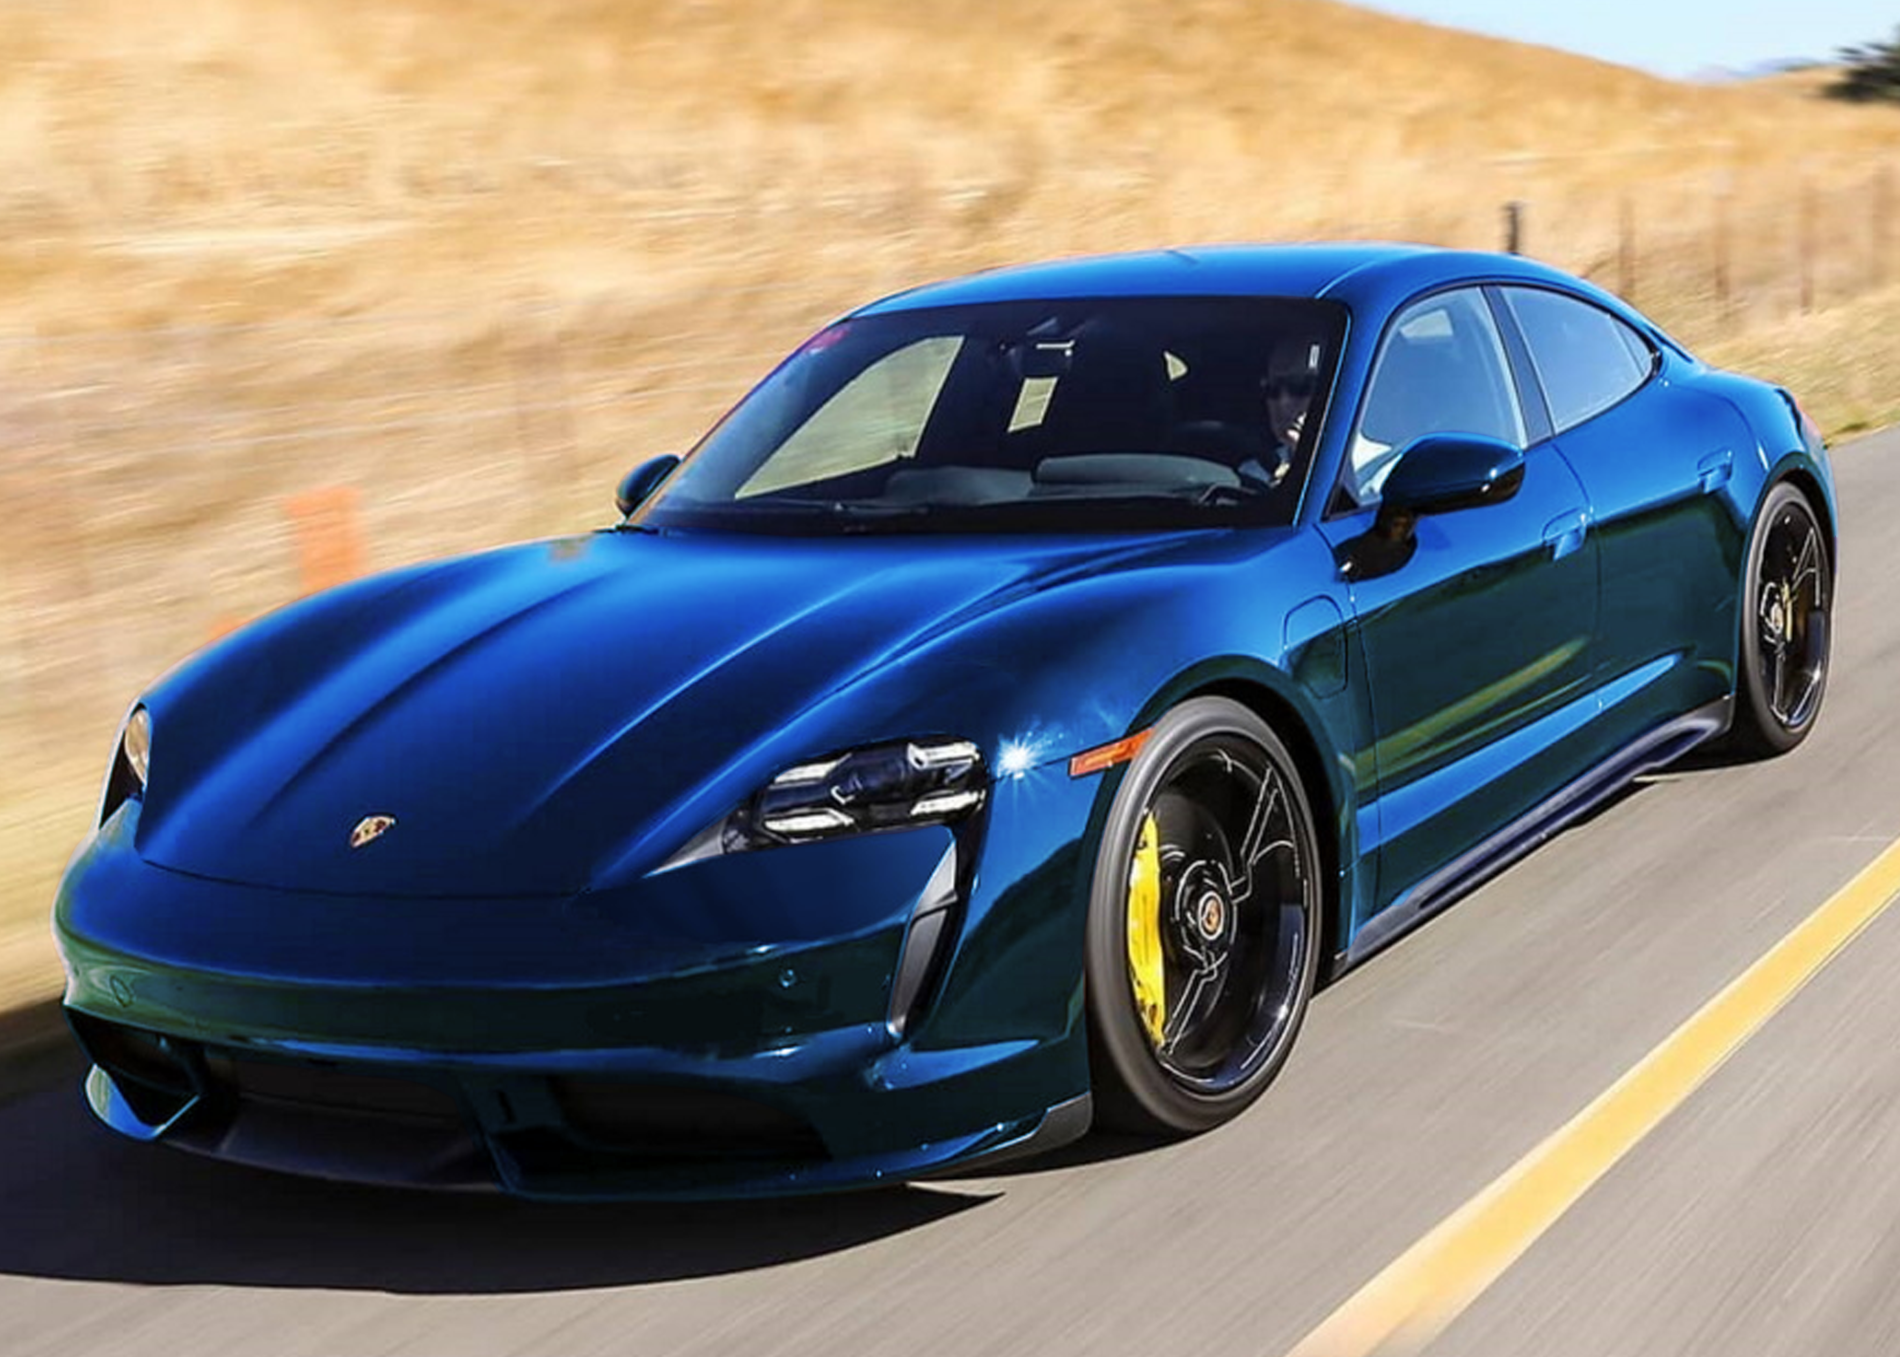 Porsche Taycan Possible Taycan color options........... Tay blue